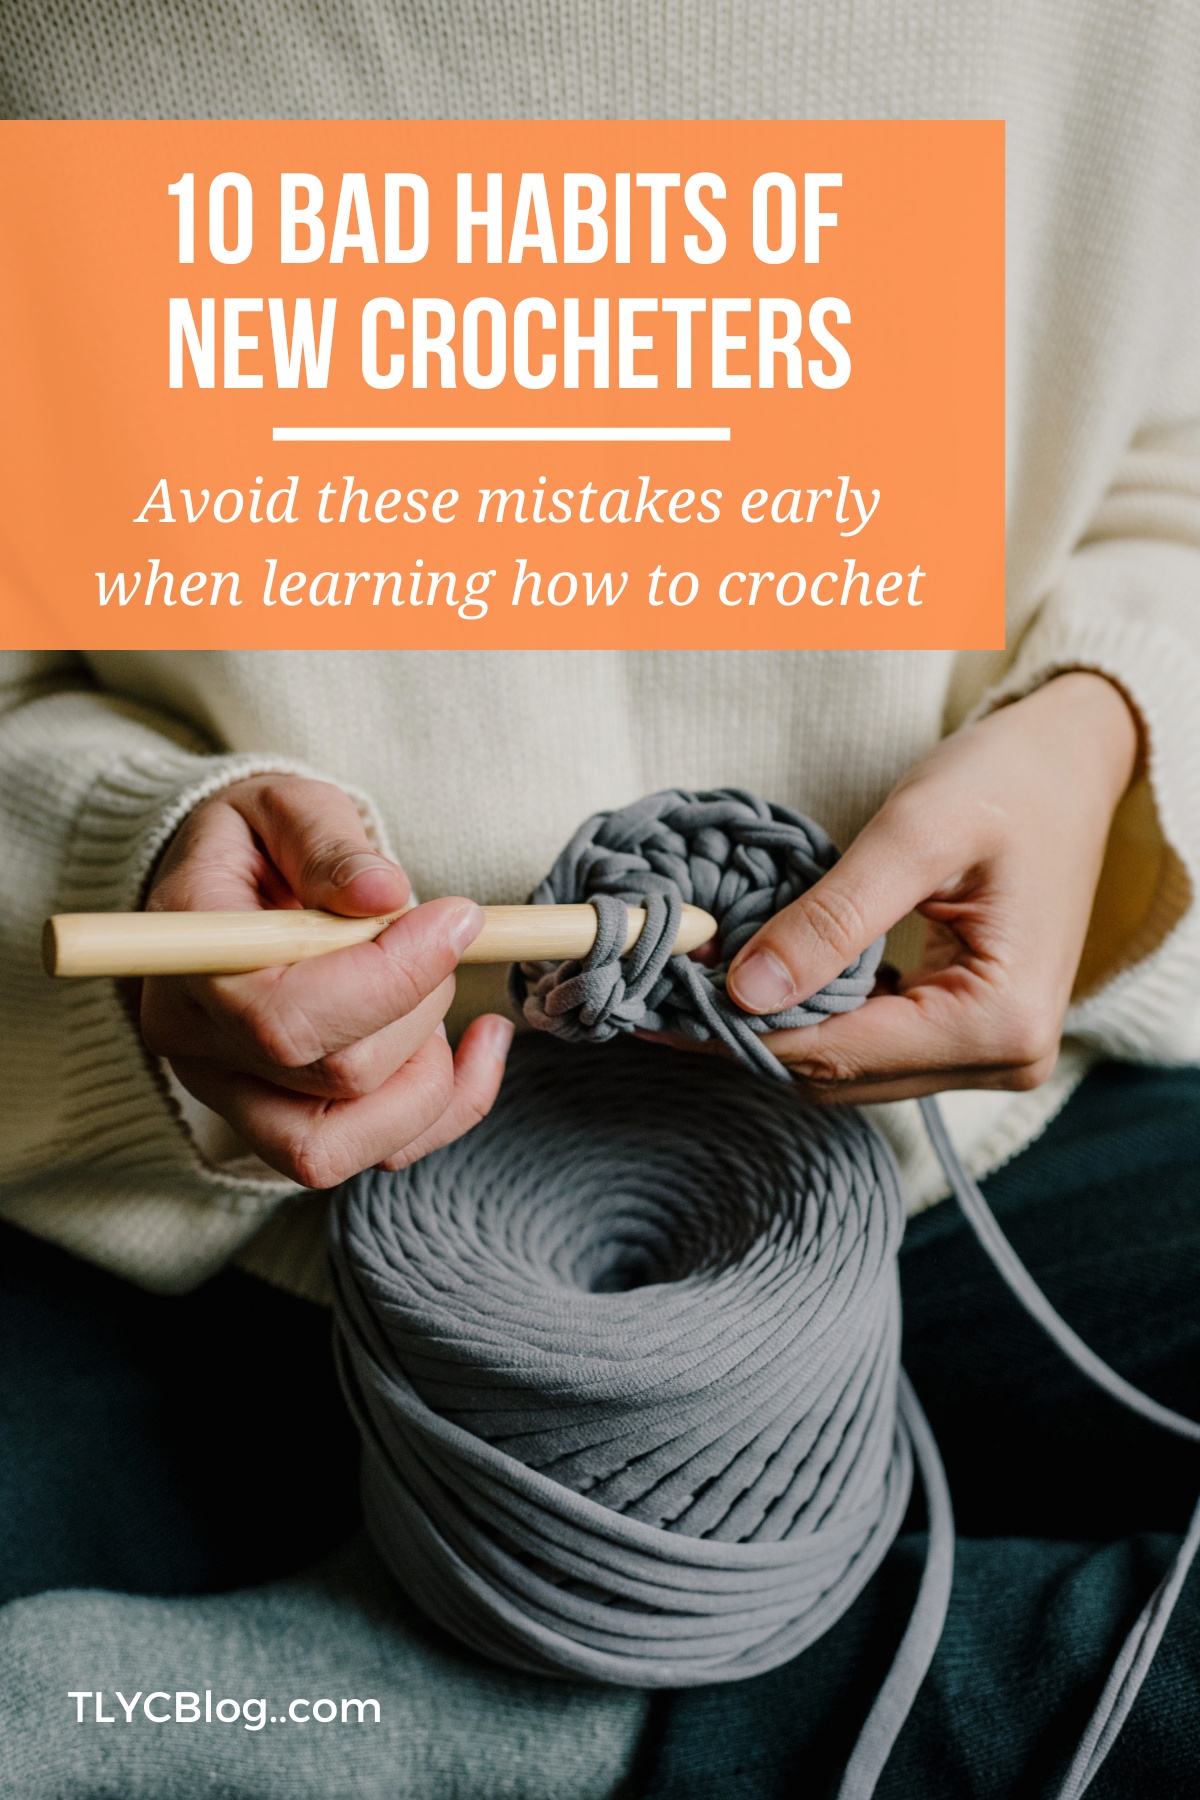 10 bad habits of new crocheters. Break these crochet bad habits to improve your skills and have more fun! Love crochet again. 